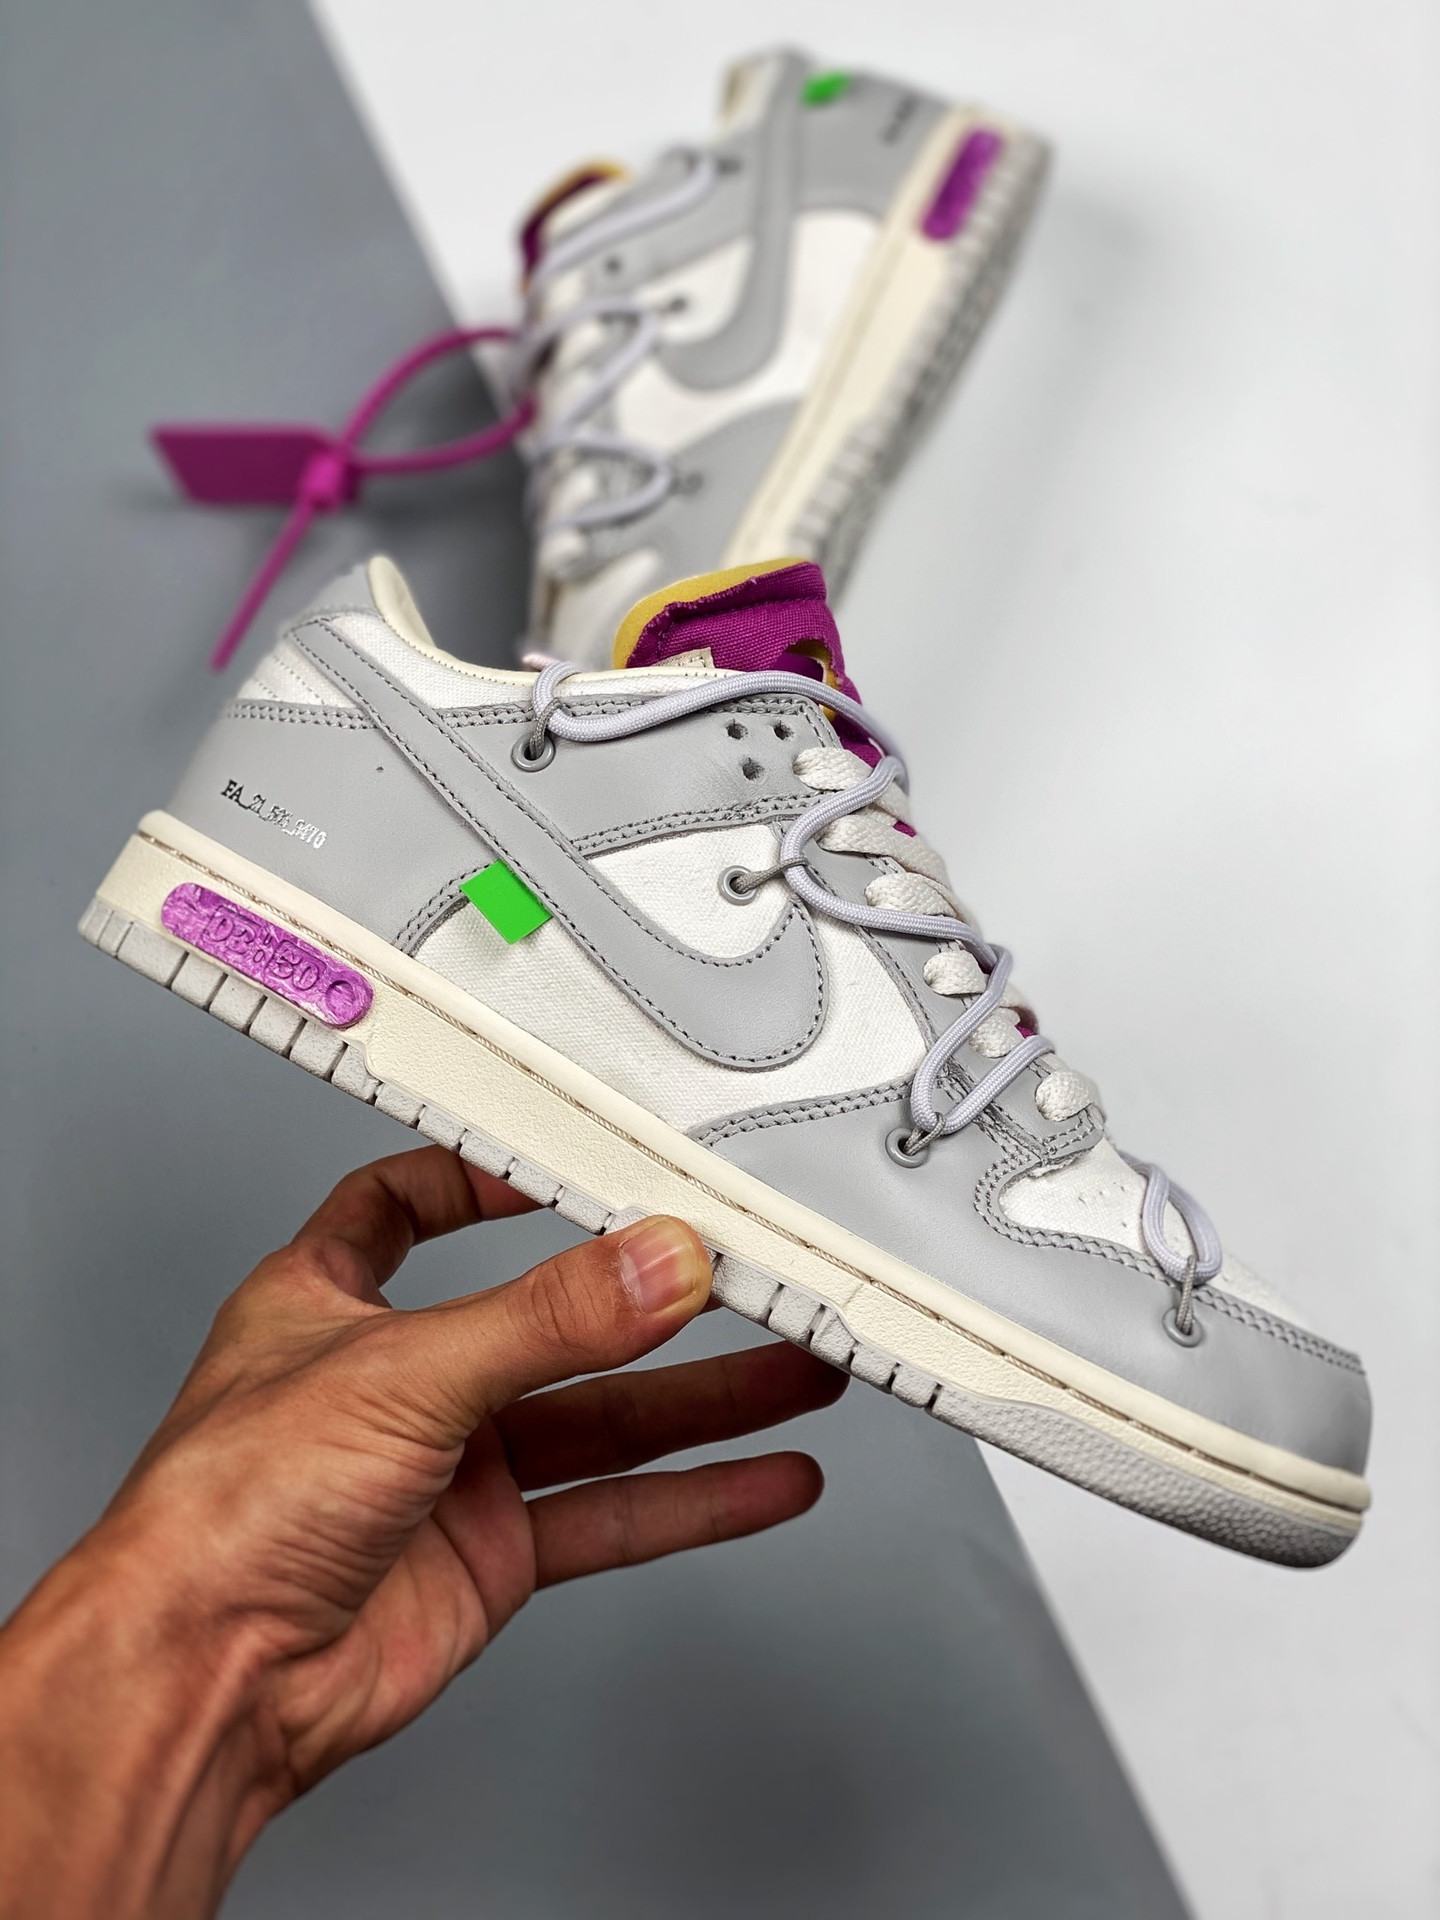 Off-White x Nike Dunk Low 03 of 50 Sail Grey Purple For Sale